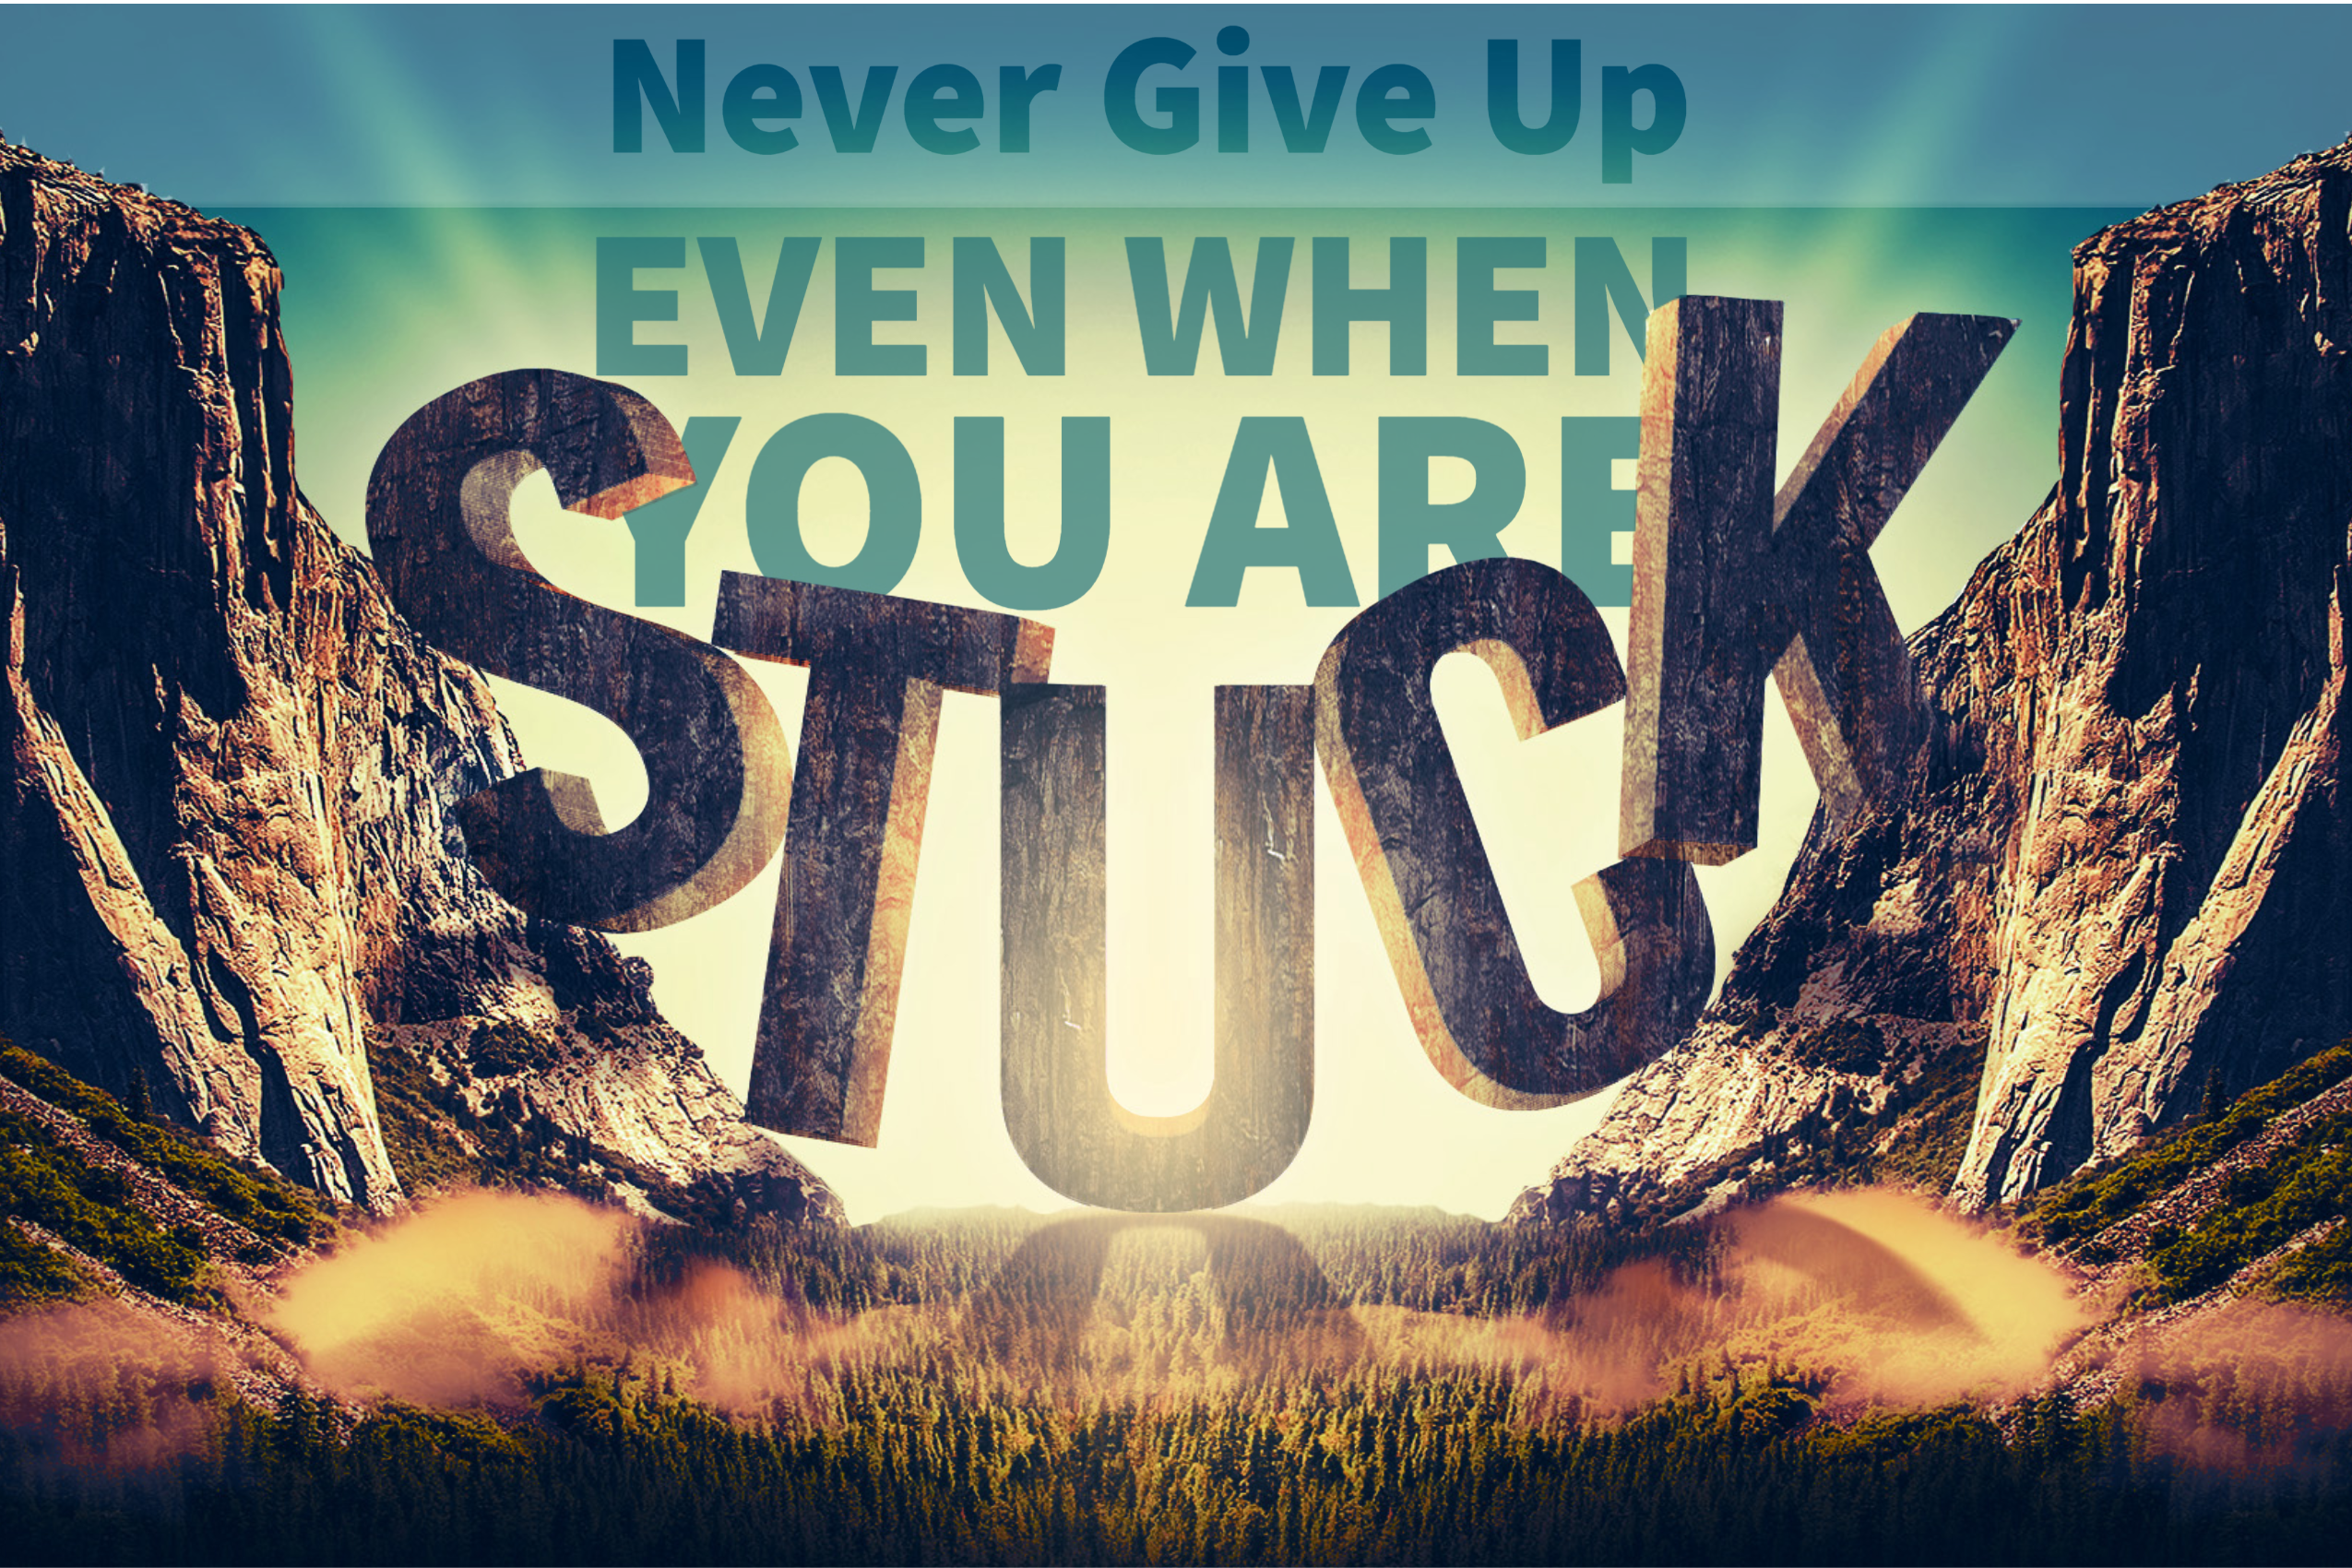 Never Give Up: Even When You Are Stuck